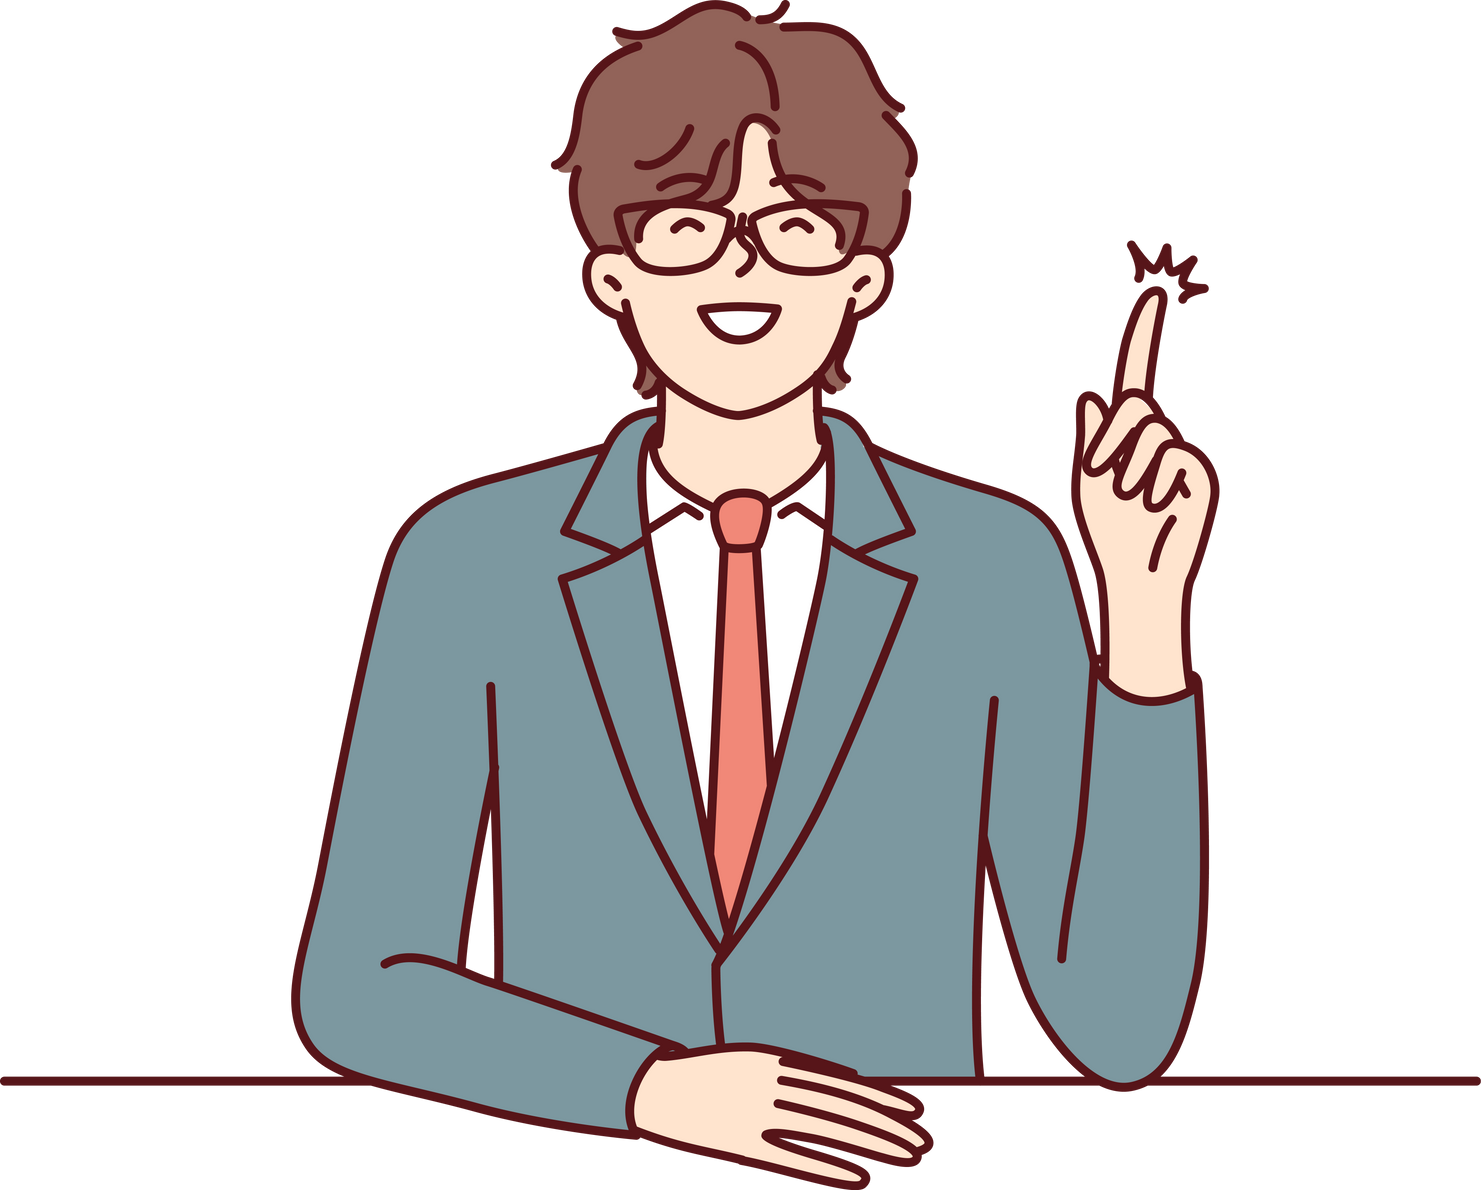 Man in business suit raises hand and wants to speak during meeting with colleagues. Vector image